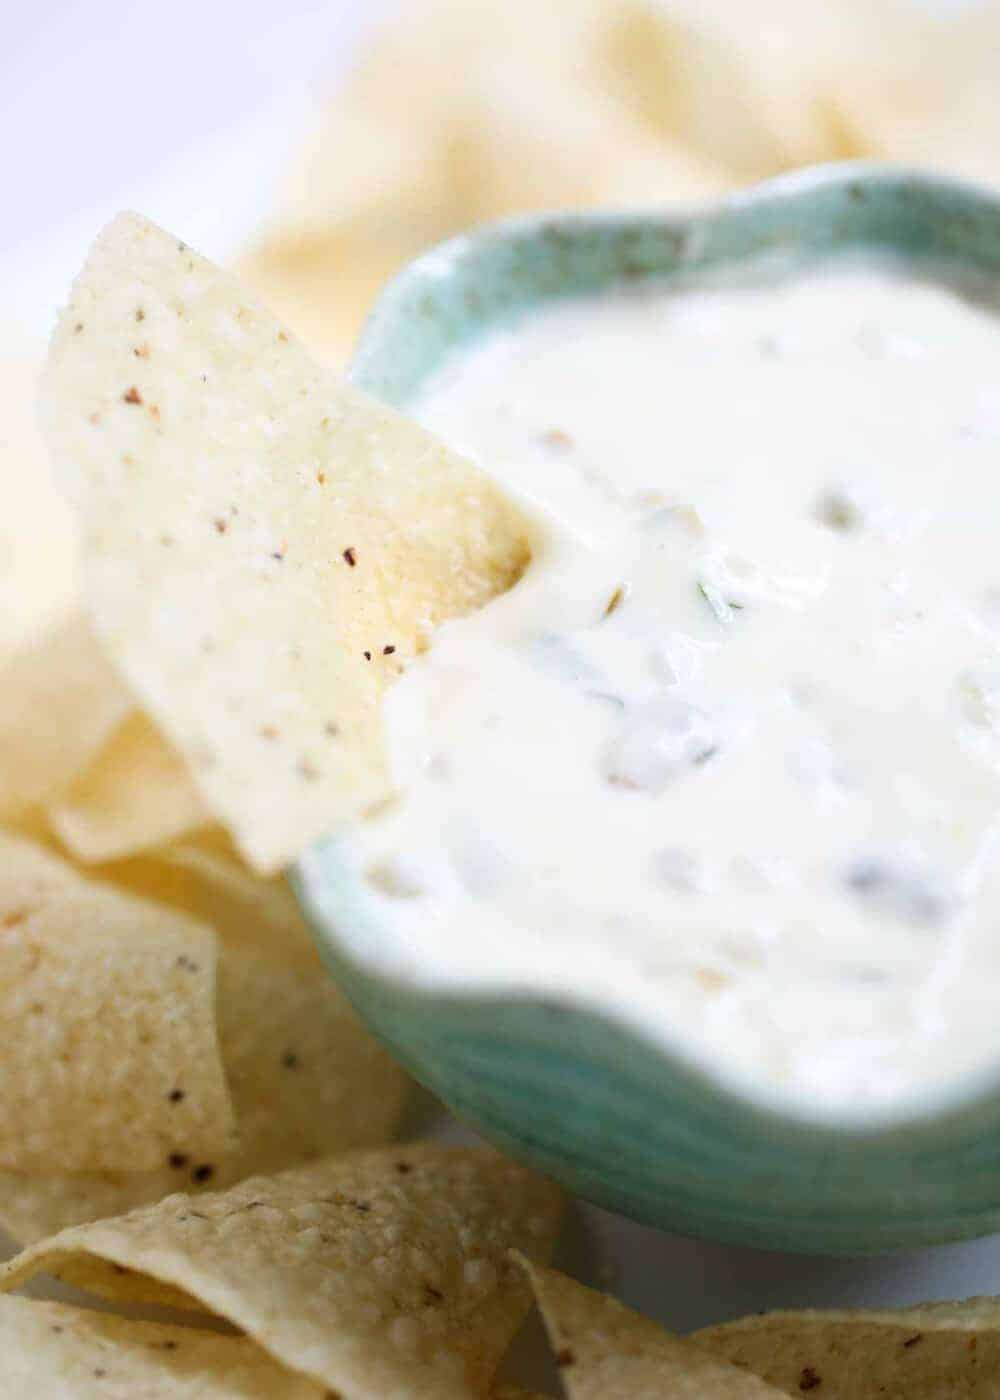 Dipping a chip in bowl of white queso dip.